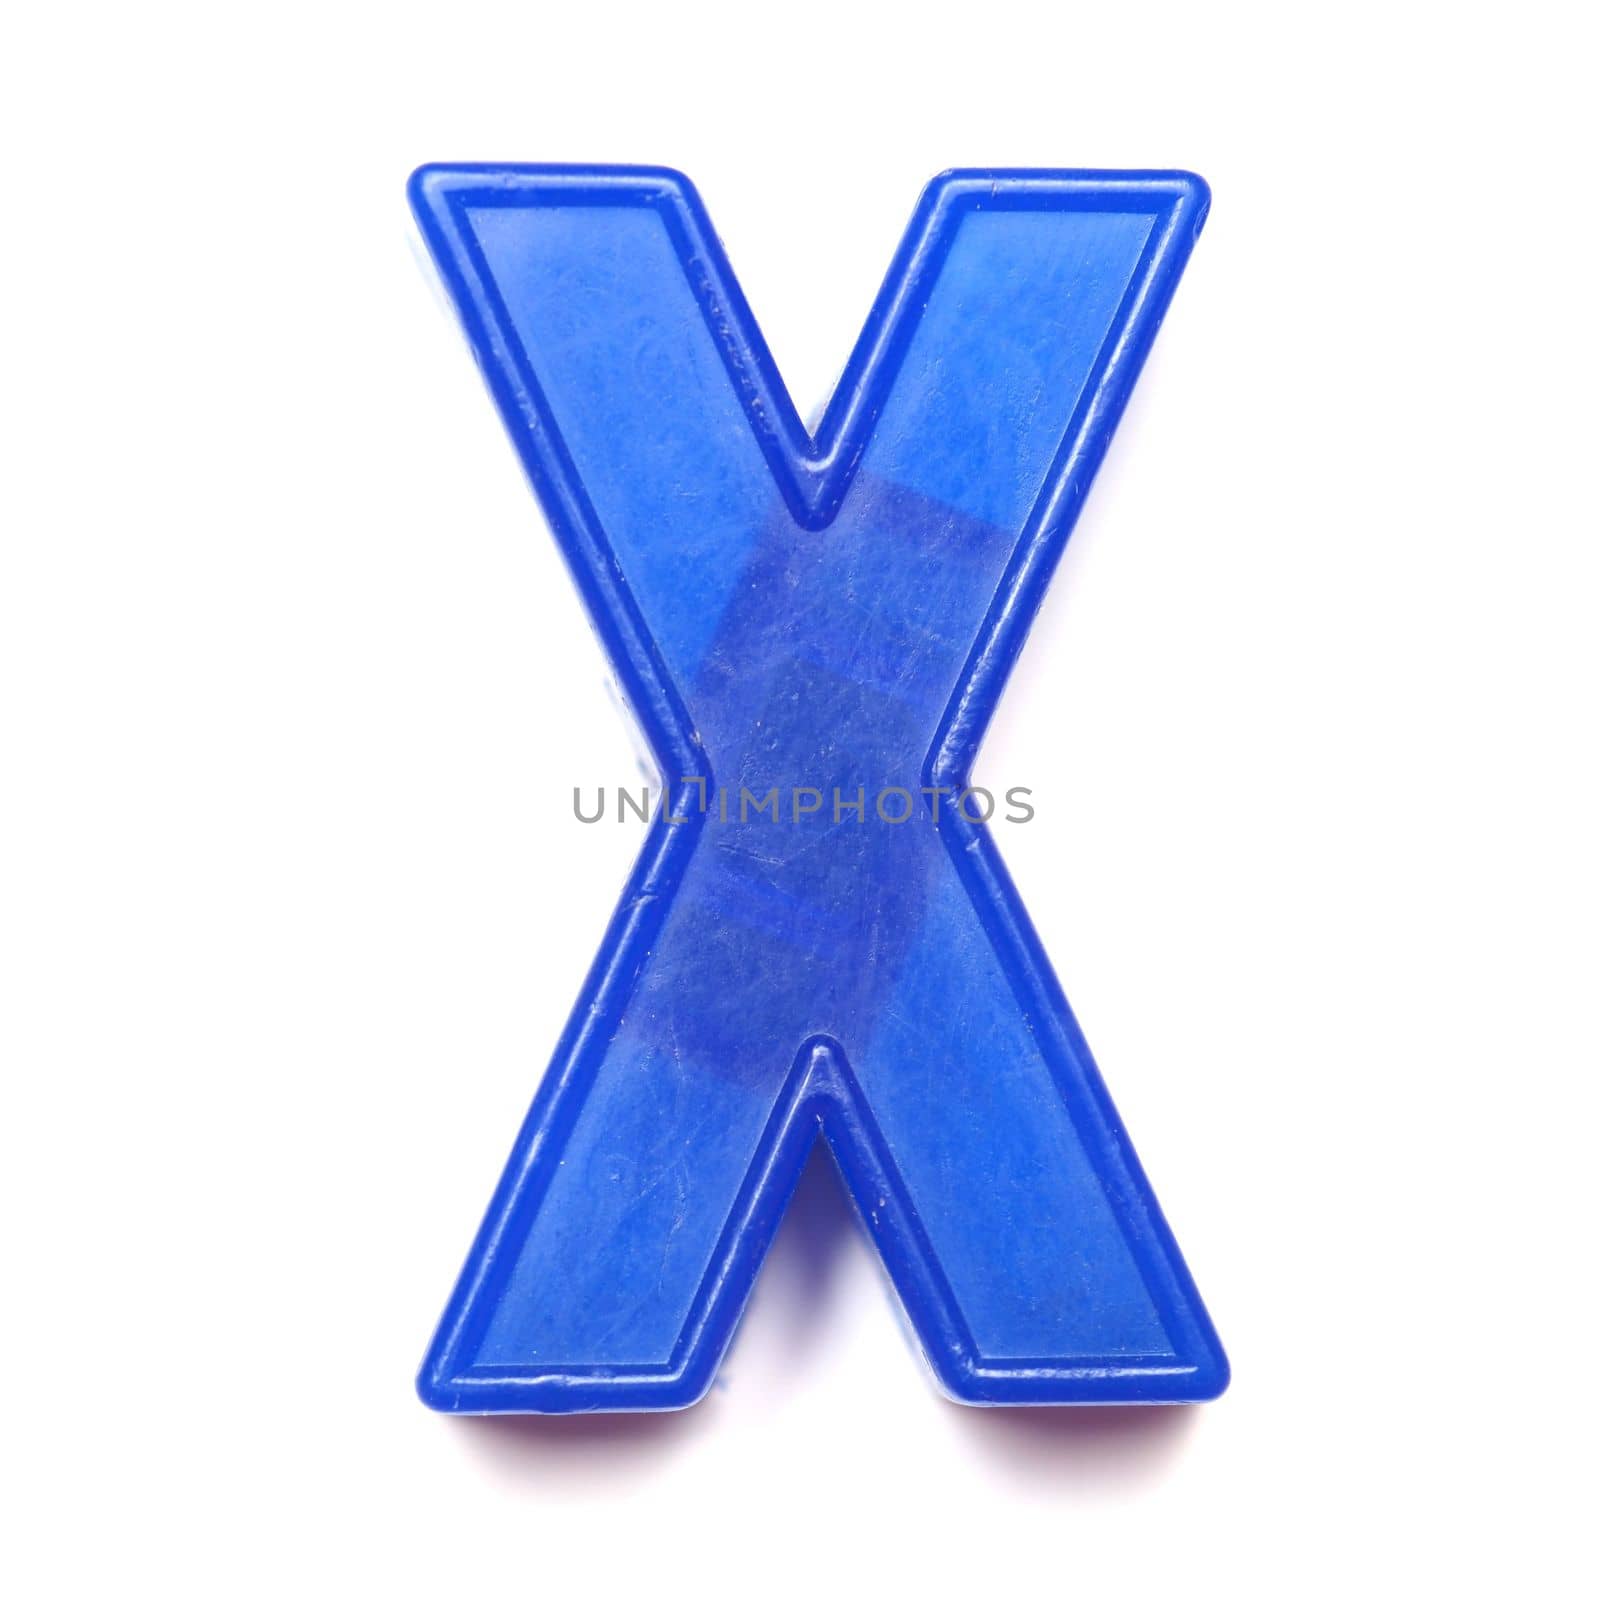 Magnetic uppercase letter X by claudiodivizia